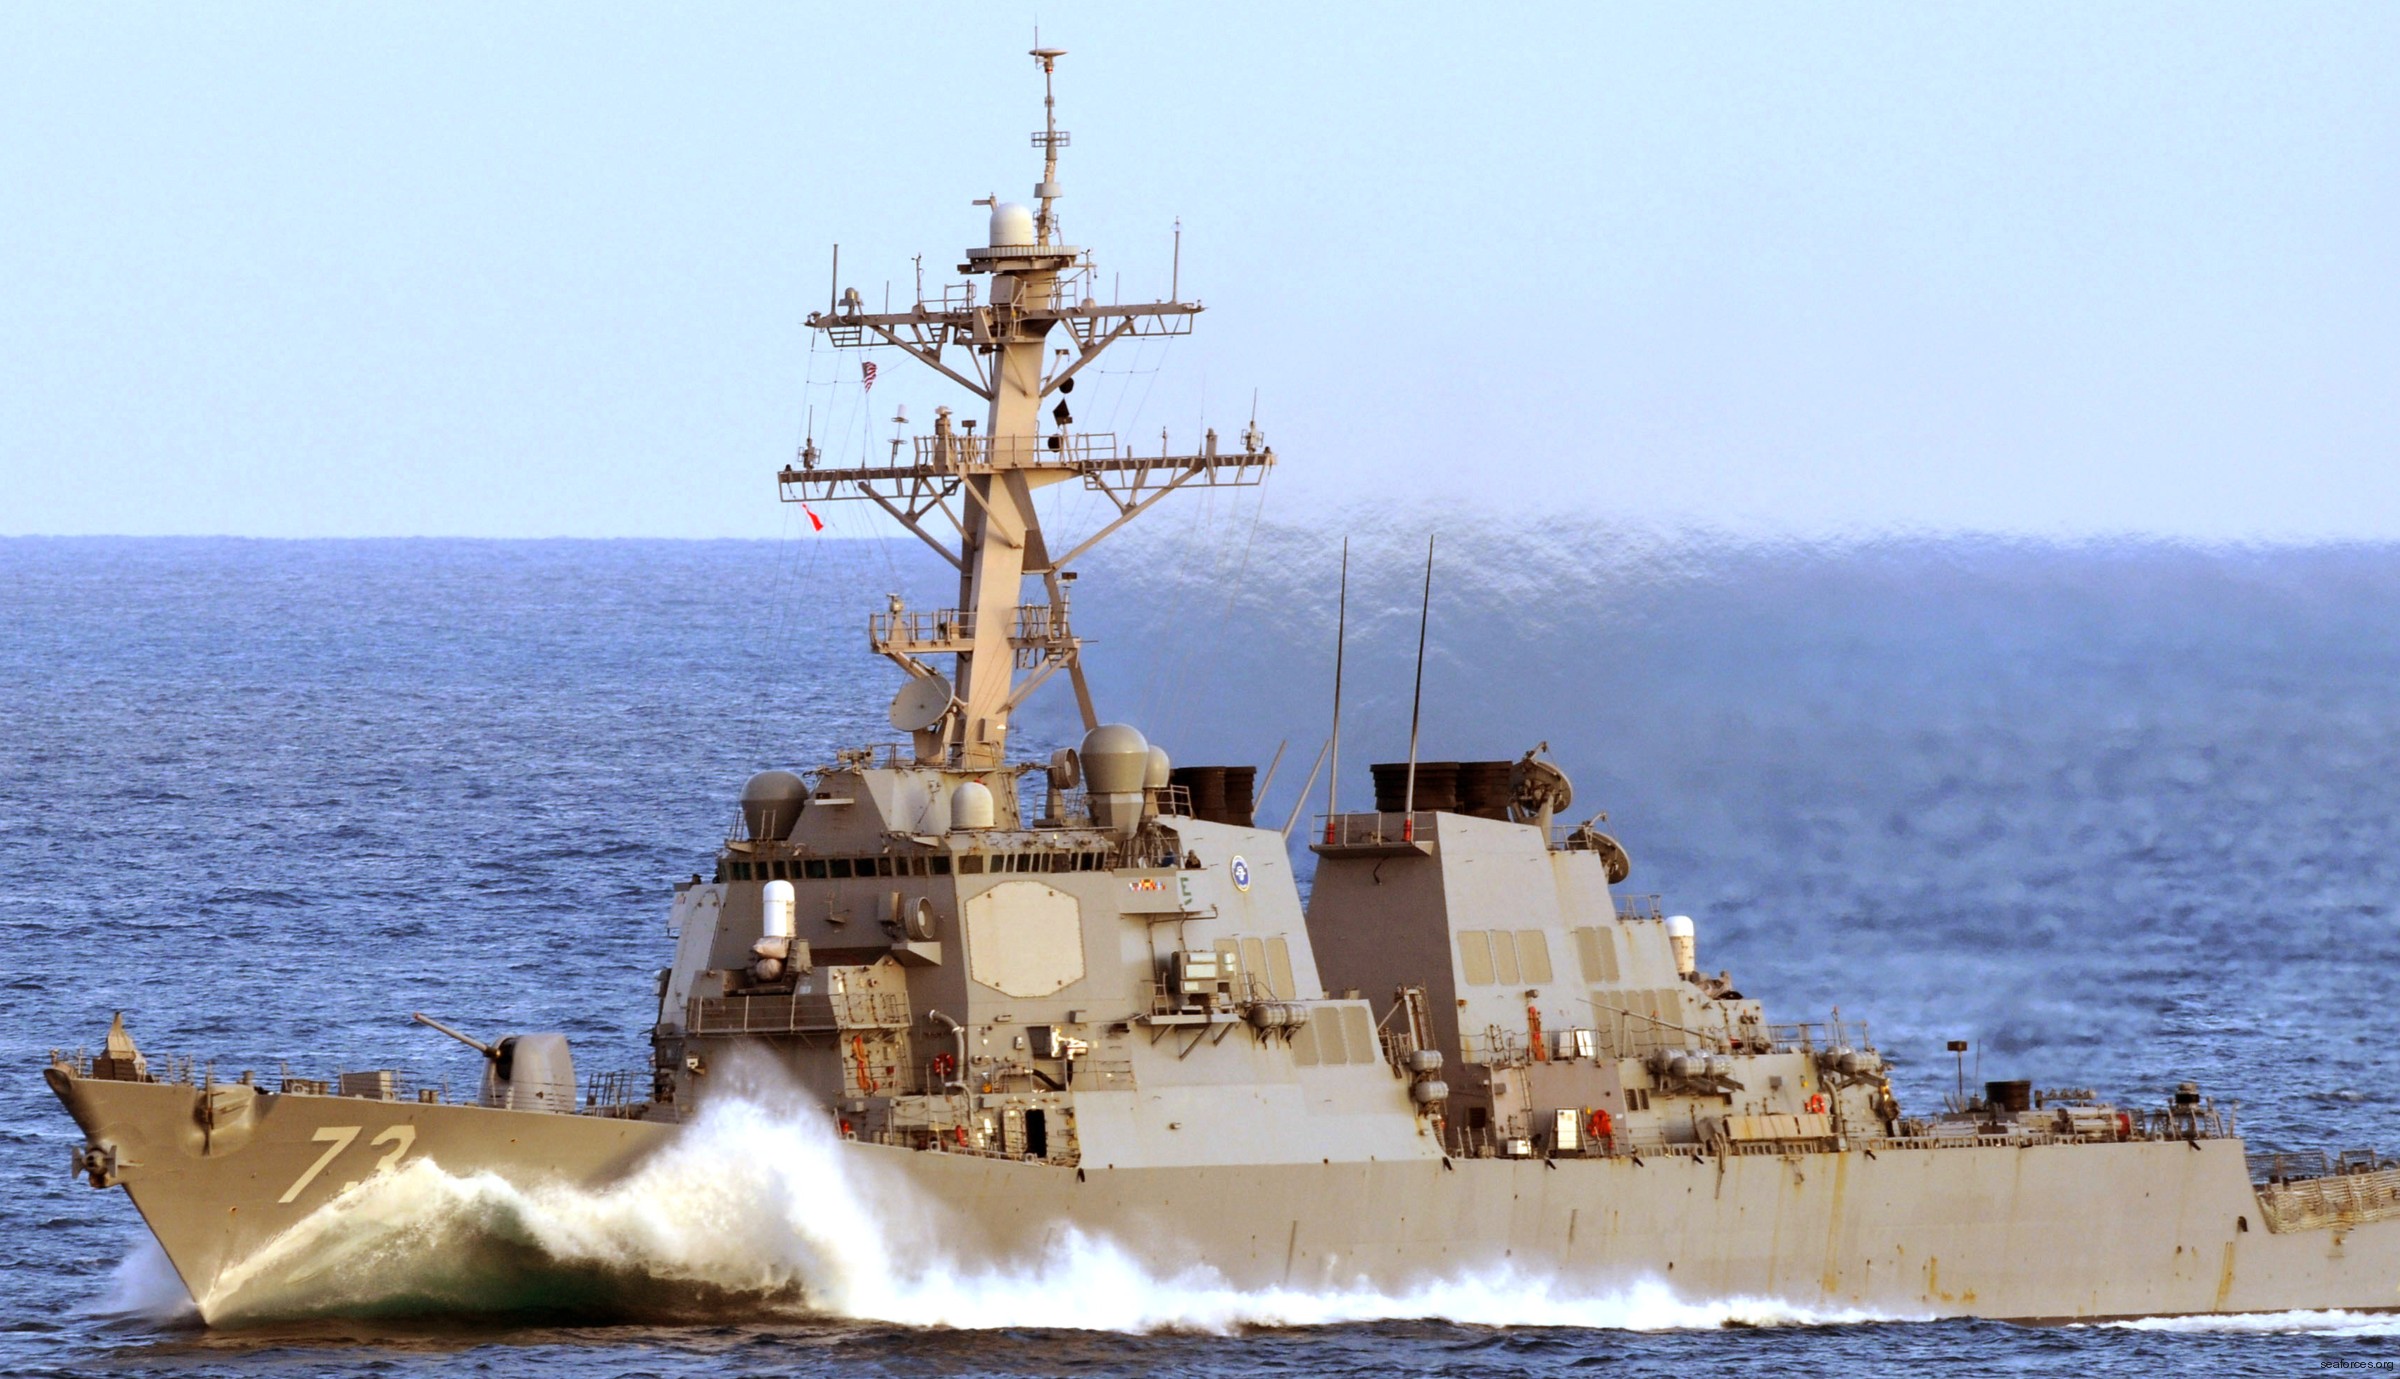 ddg-73 uss decatur guided missile destroyer arleigh burke class aegis bmd 30